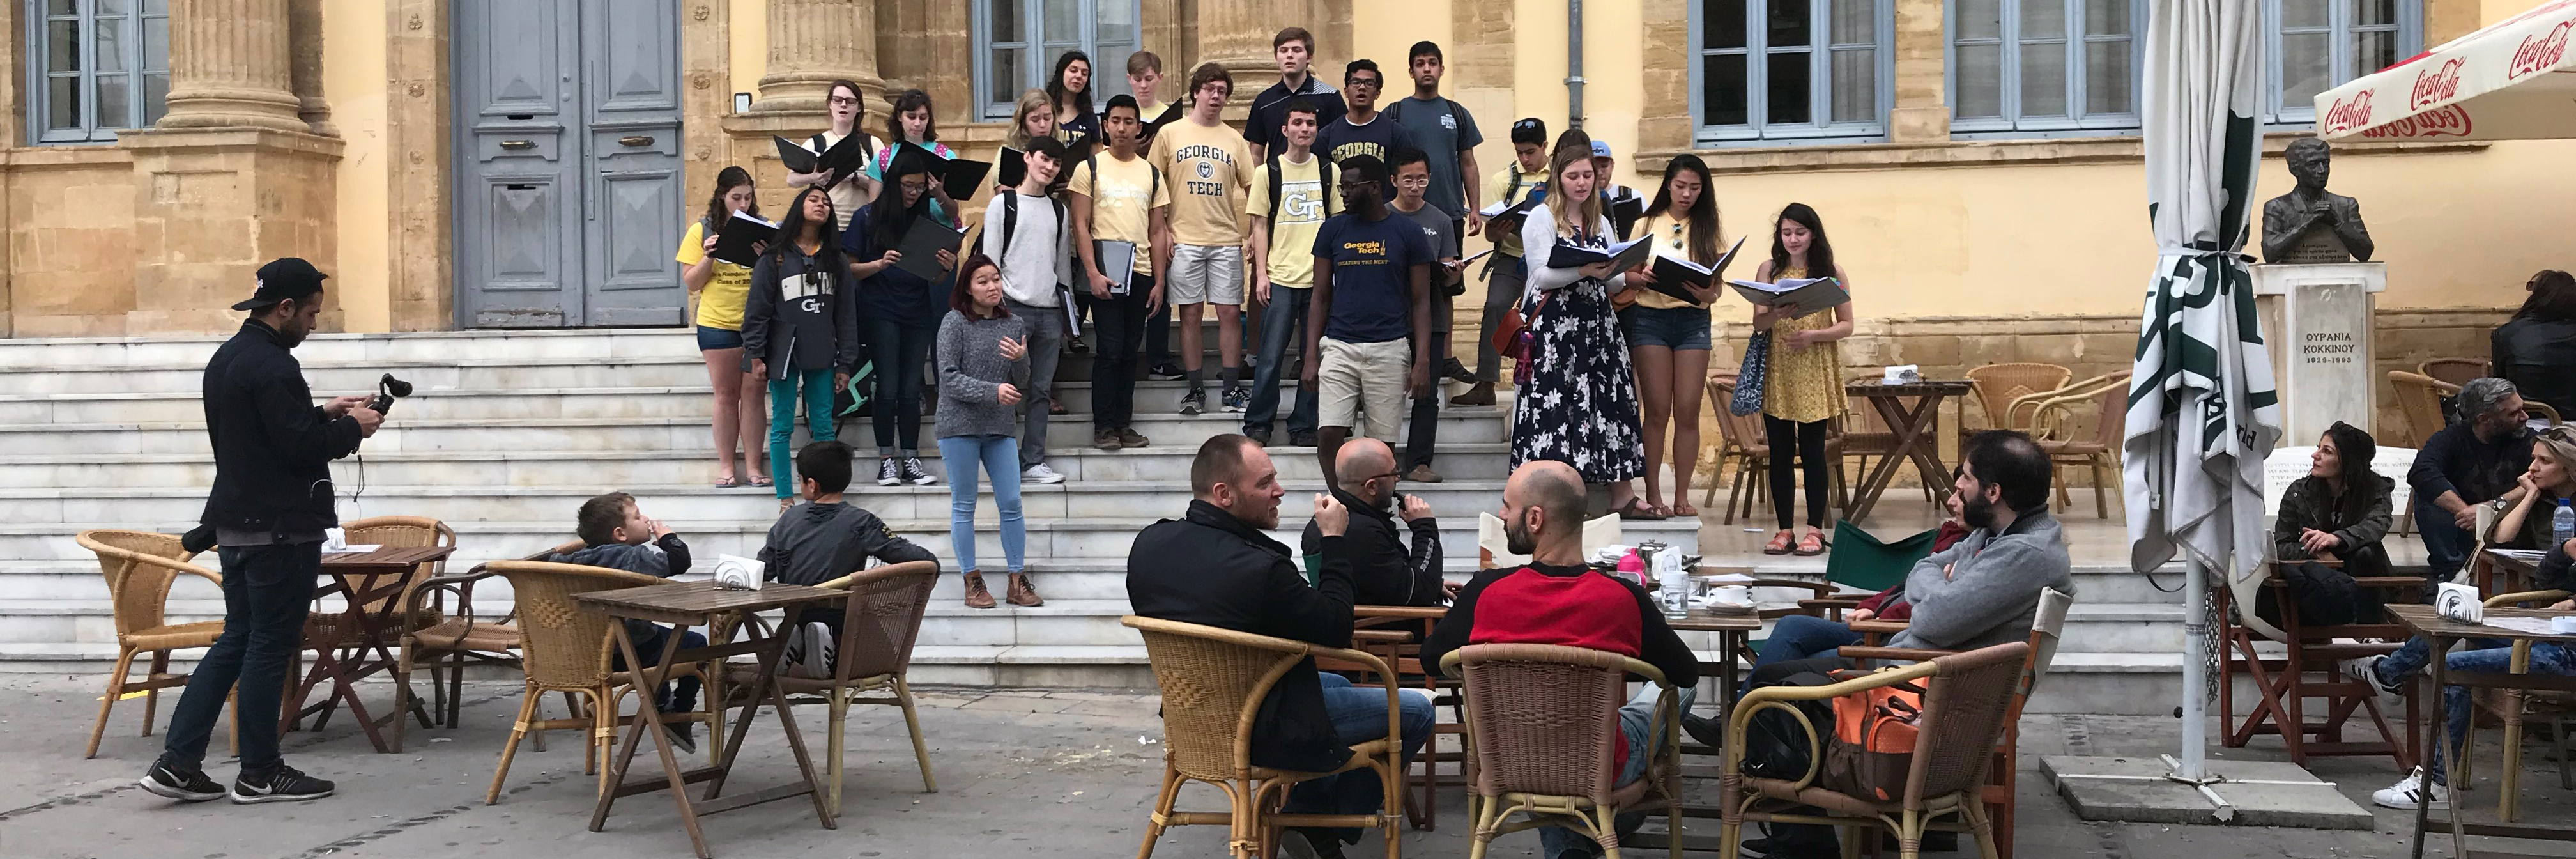 The Chamber Choir performs in a pop-up concert on the streets Nicosia, the capital city of Cyprus.